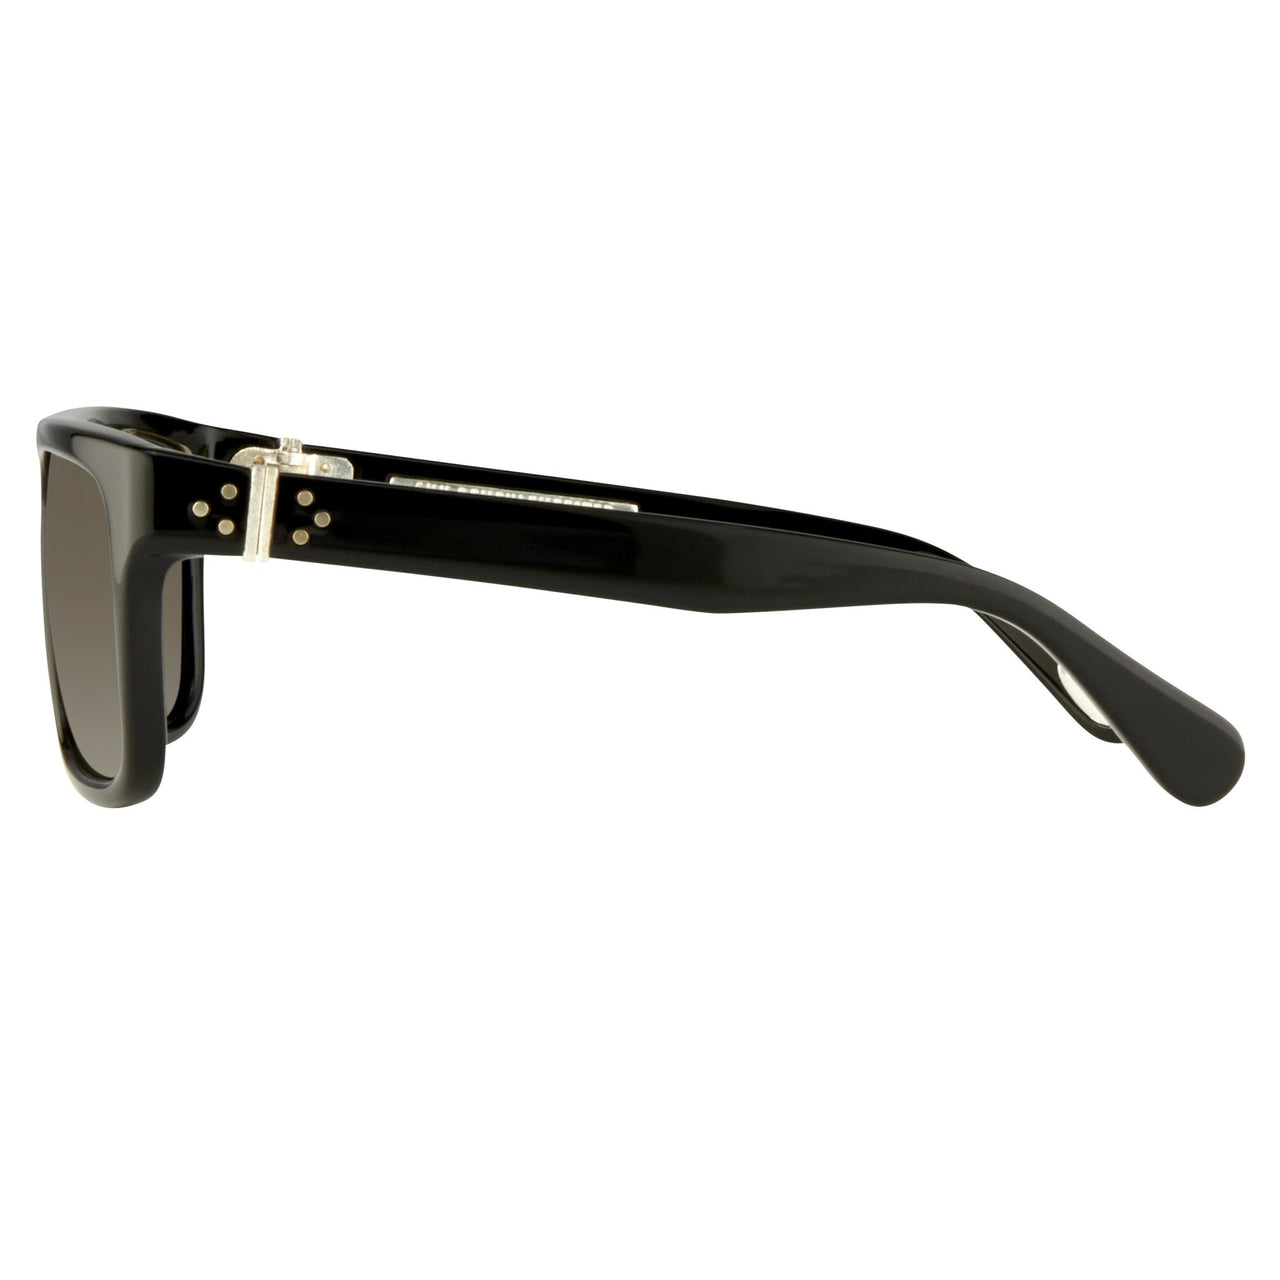 Ann Demeulemeester Sunglasses Flat Top Black 925 Silver with Grey Lenses CAT 3 AD2C1SUN - Watches & Crystals